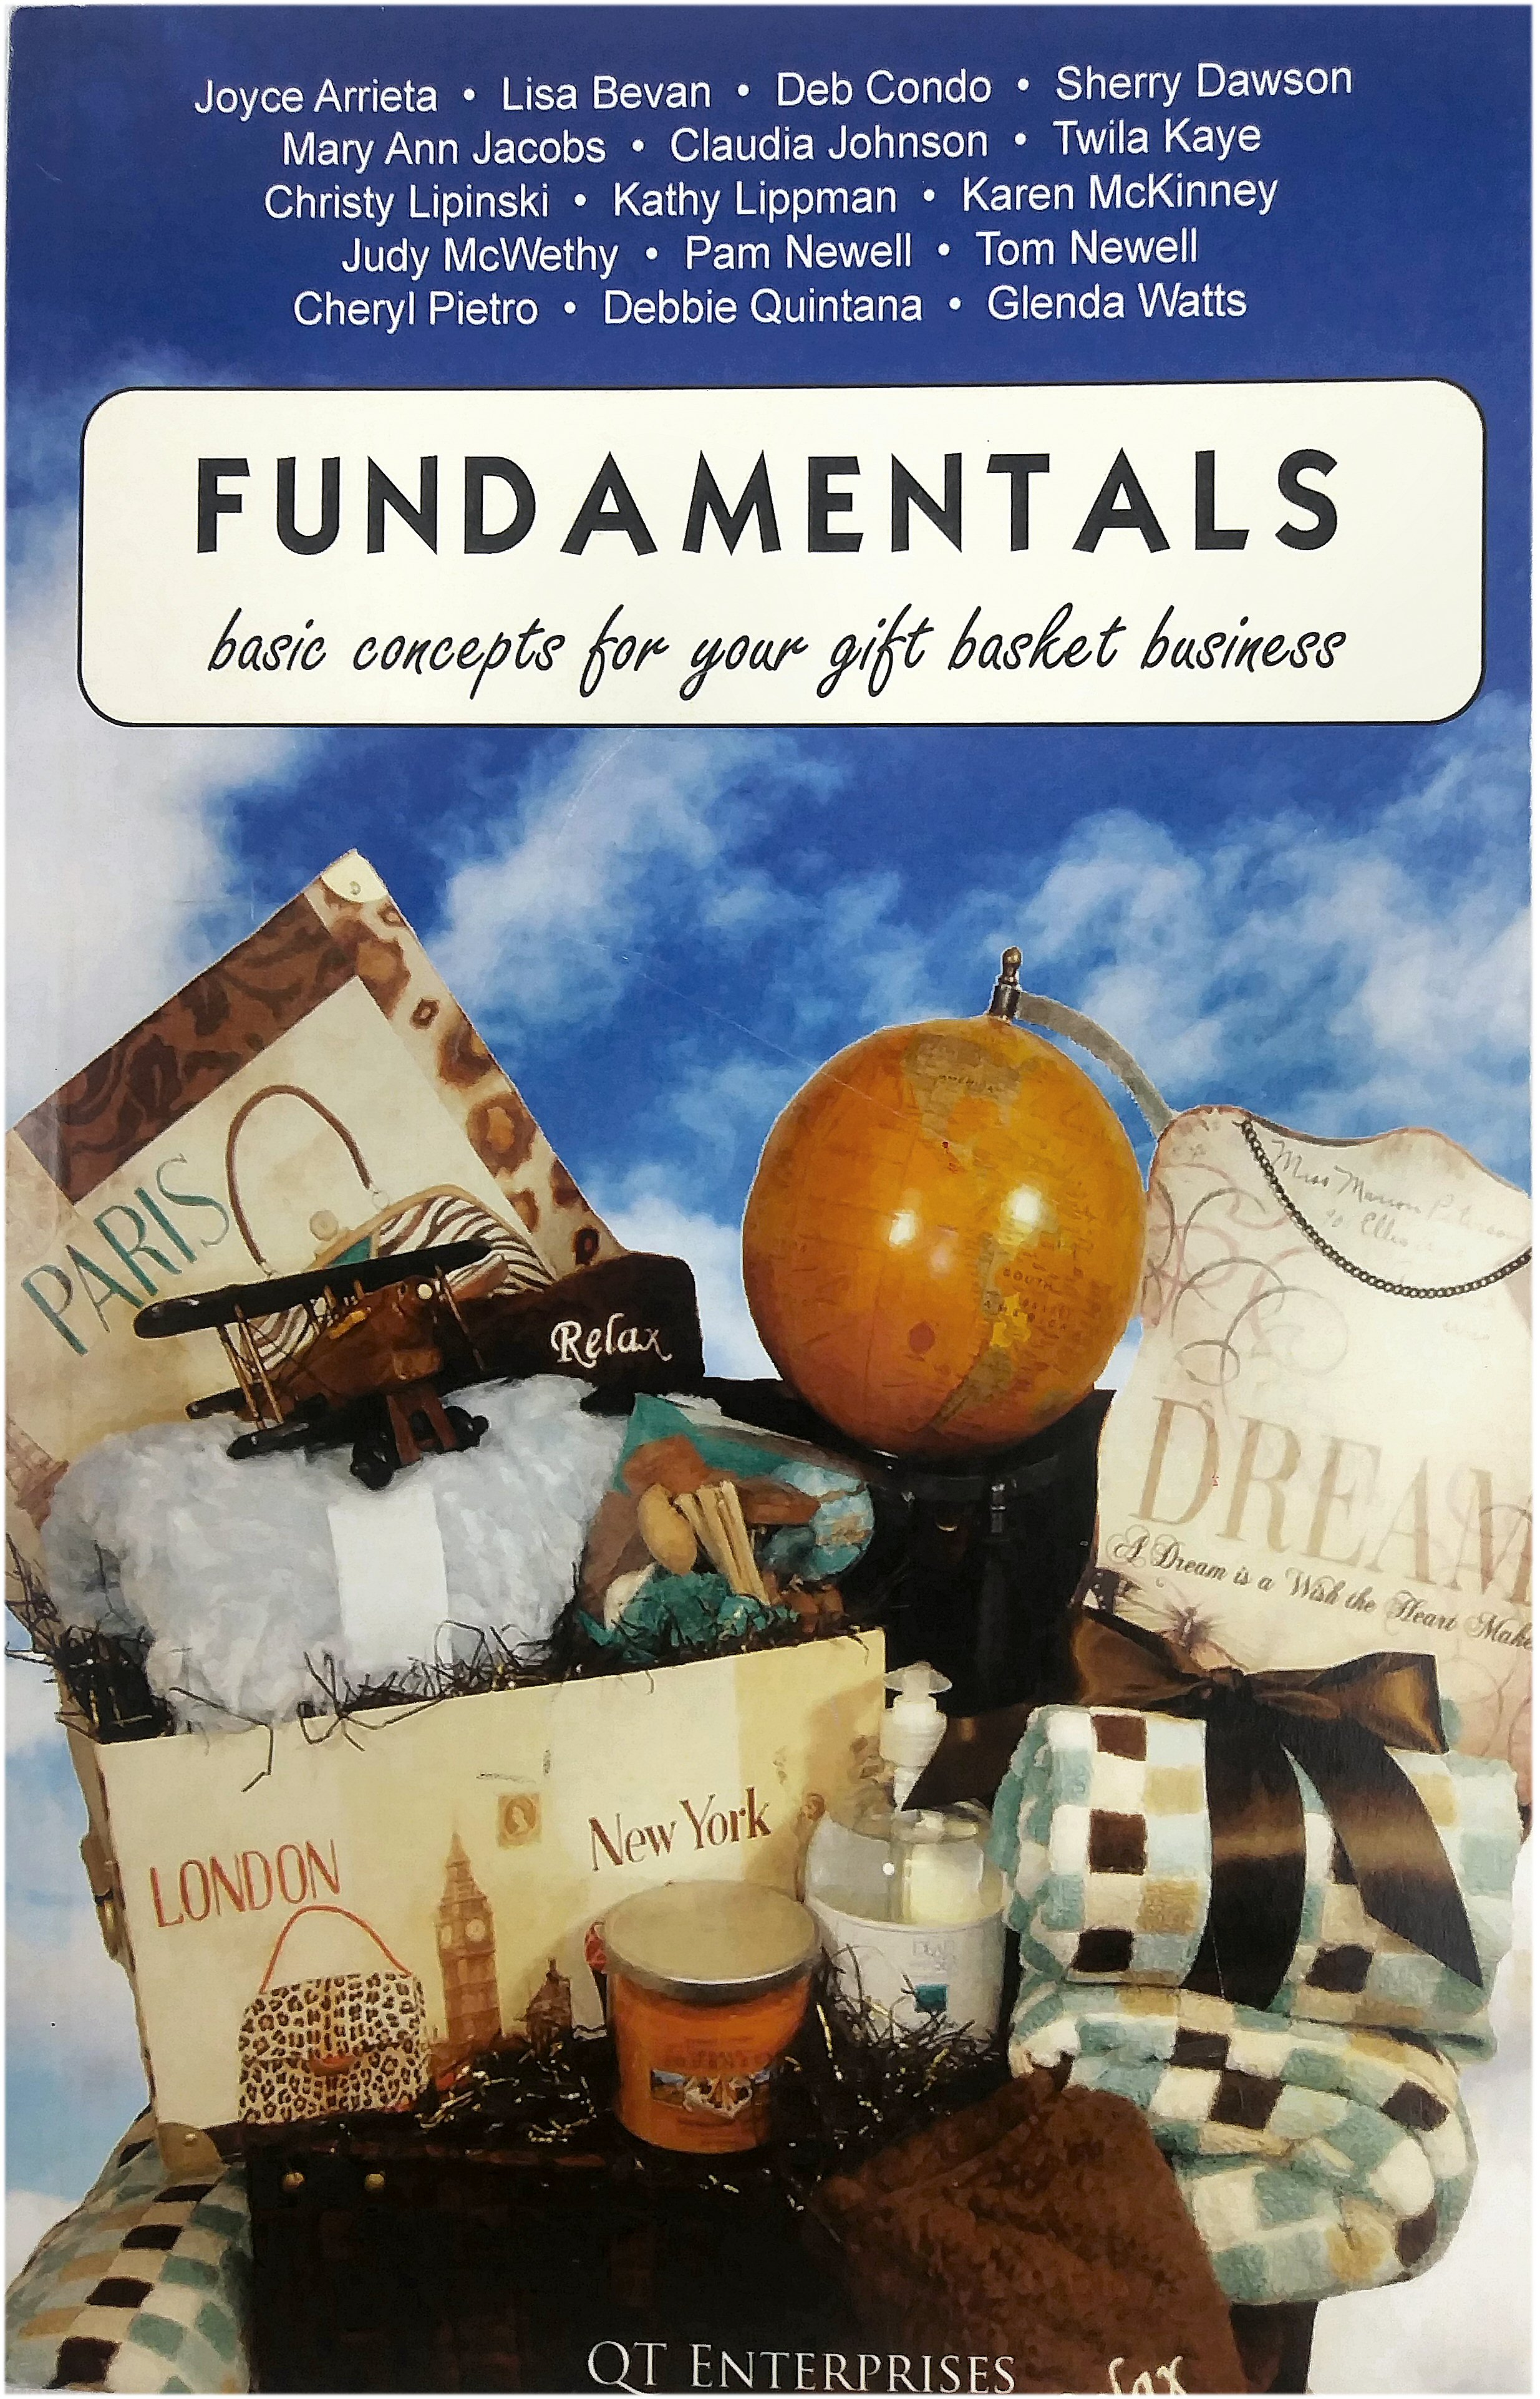 fundamentals-basic-concepts-for-your-gift-basket-business.jpg